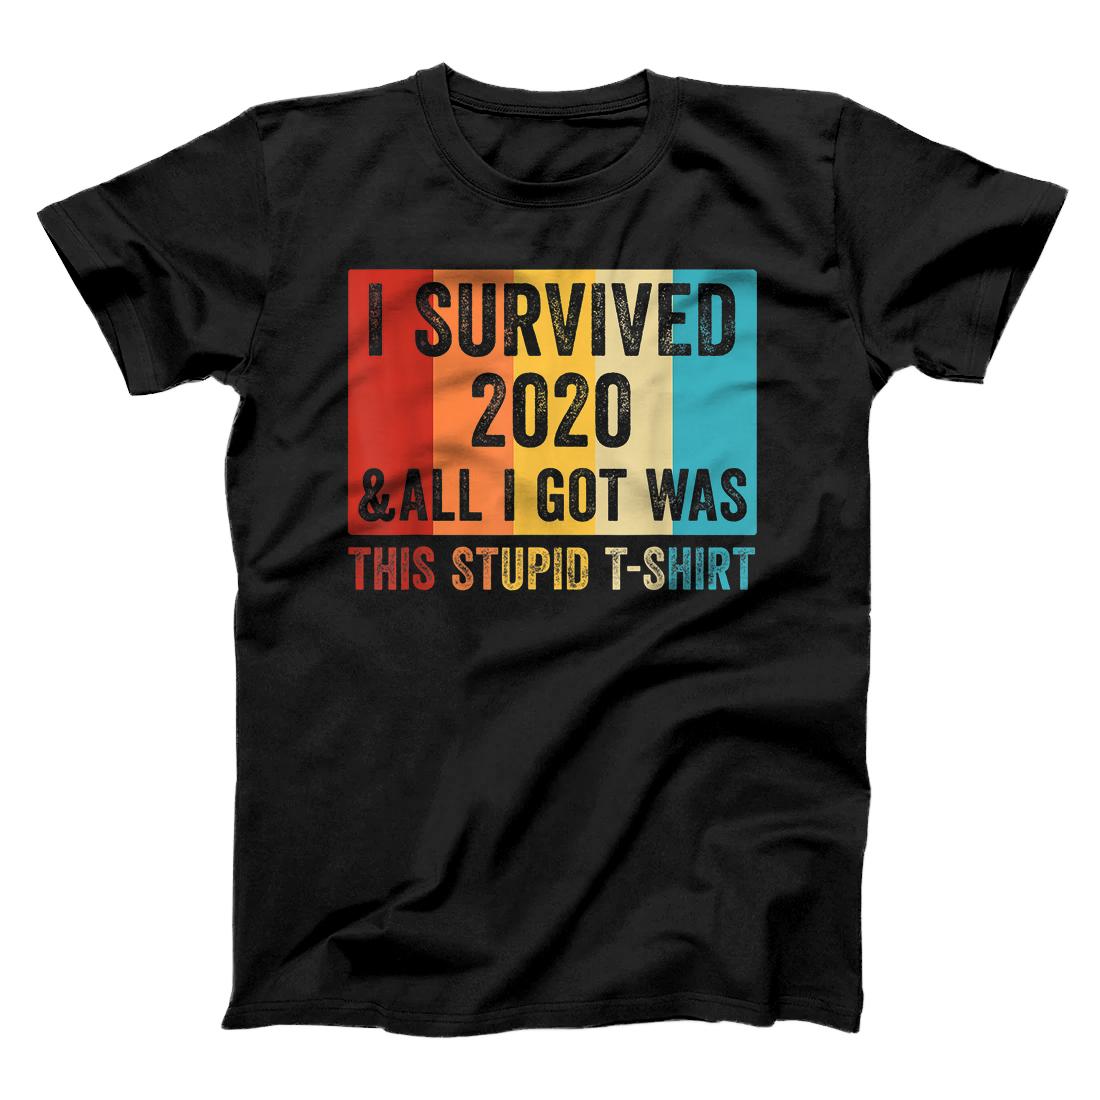 Personalized I Survived 2020 and All I Got Was This Stupid T-shirt a Gift T-Shirt